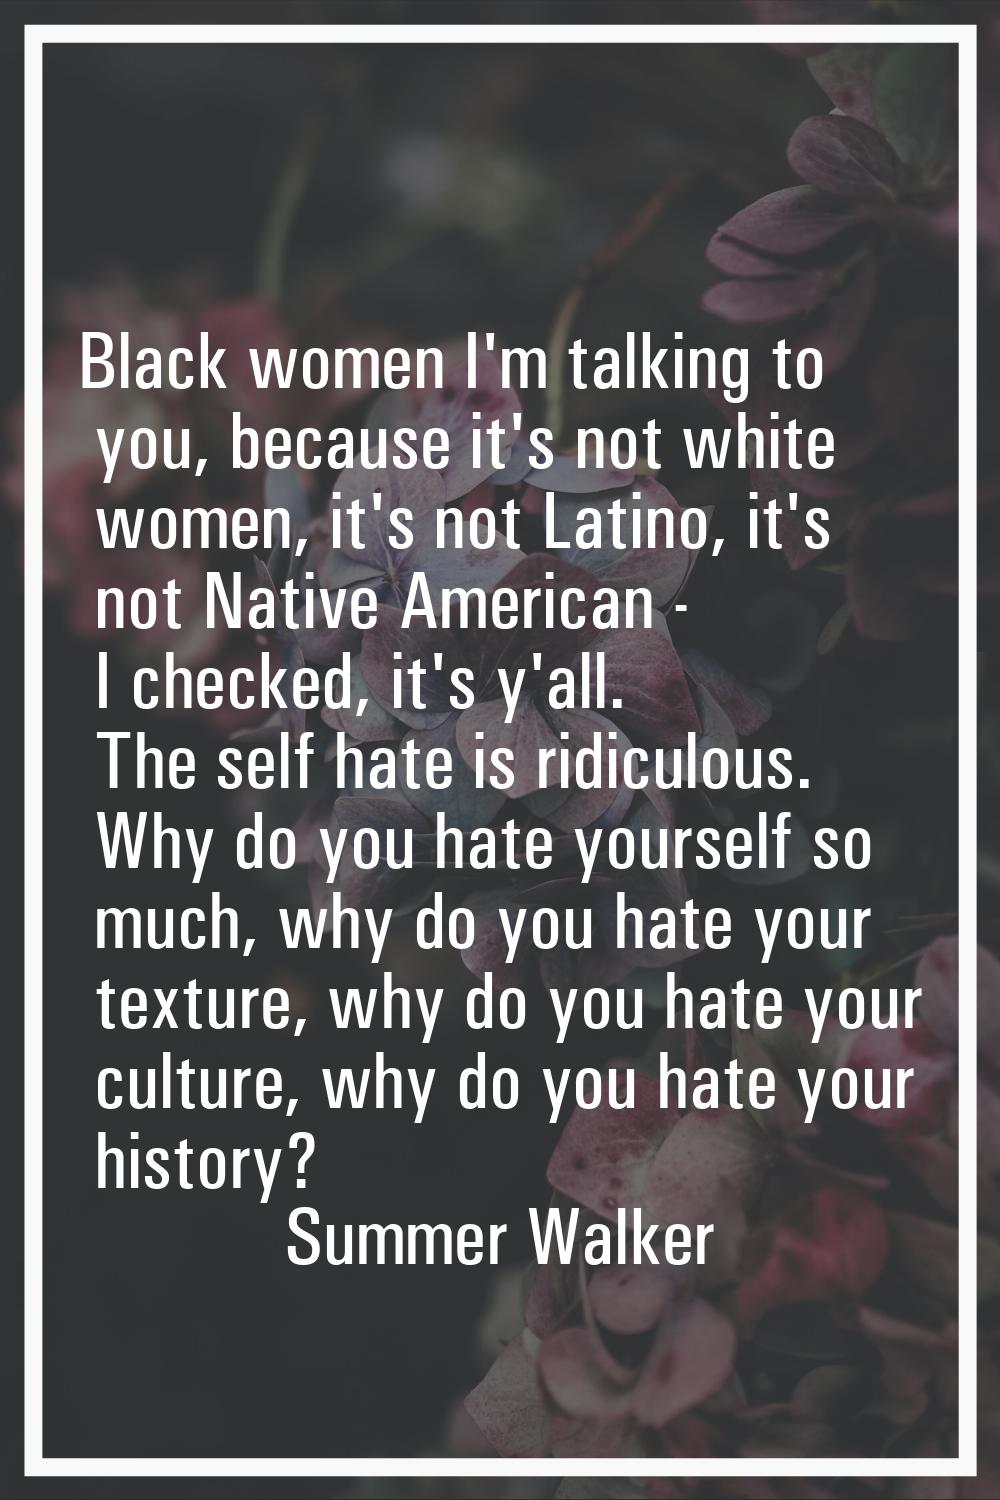 Black women I'm talking to you, because it's not white women, it's not Latino, it's not Native Amer